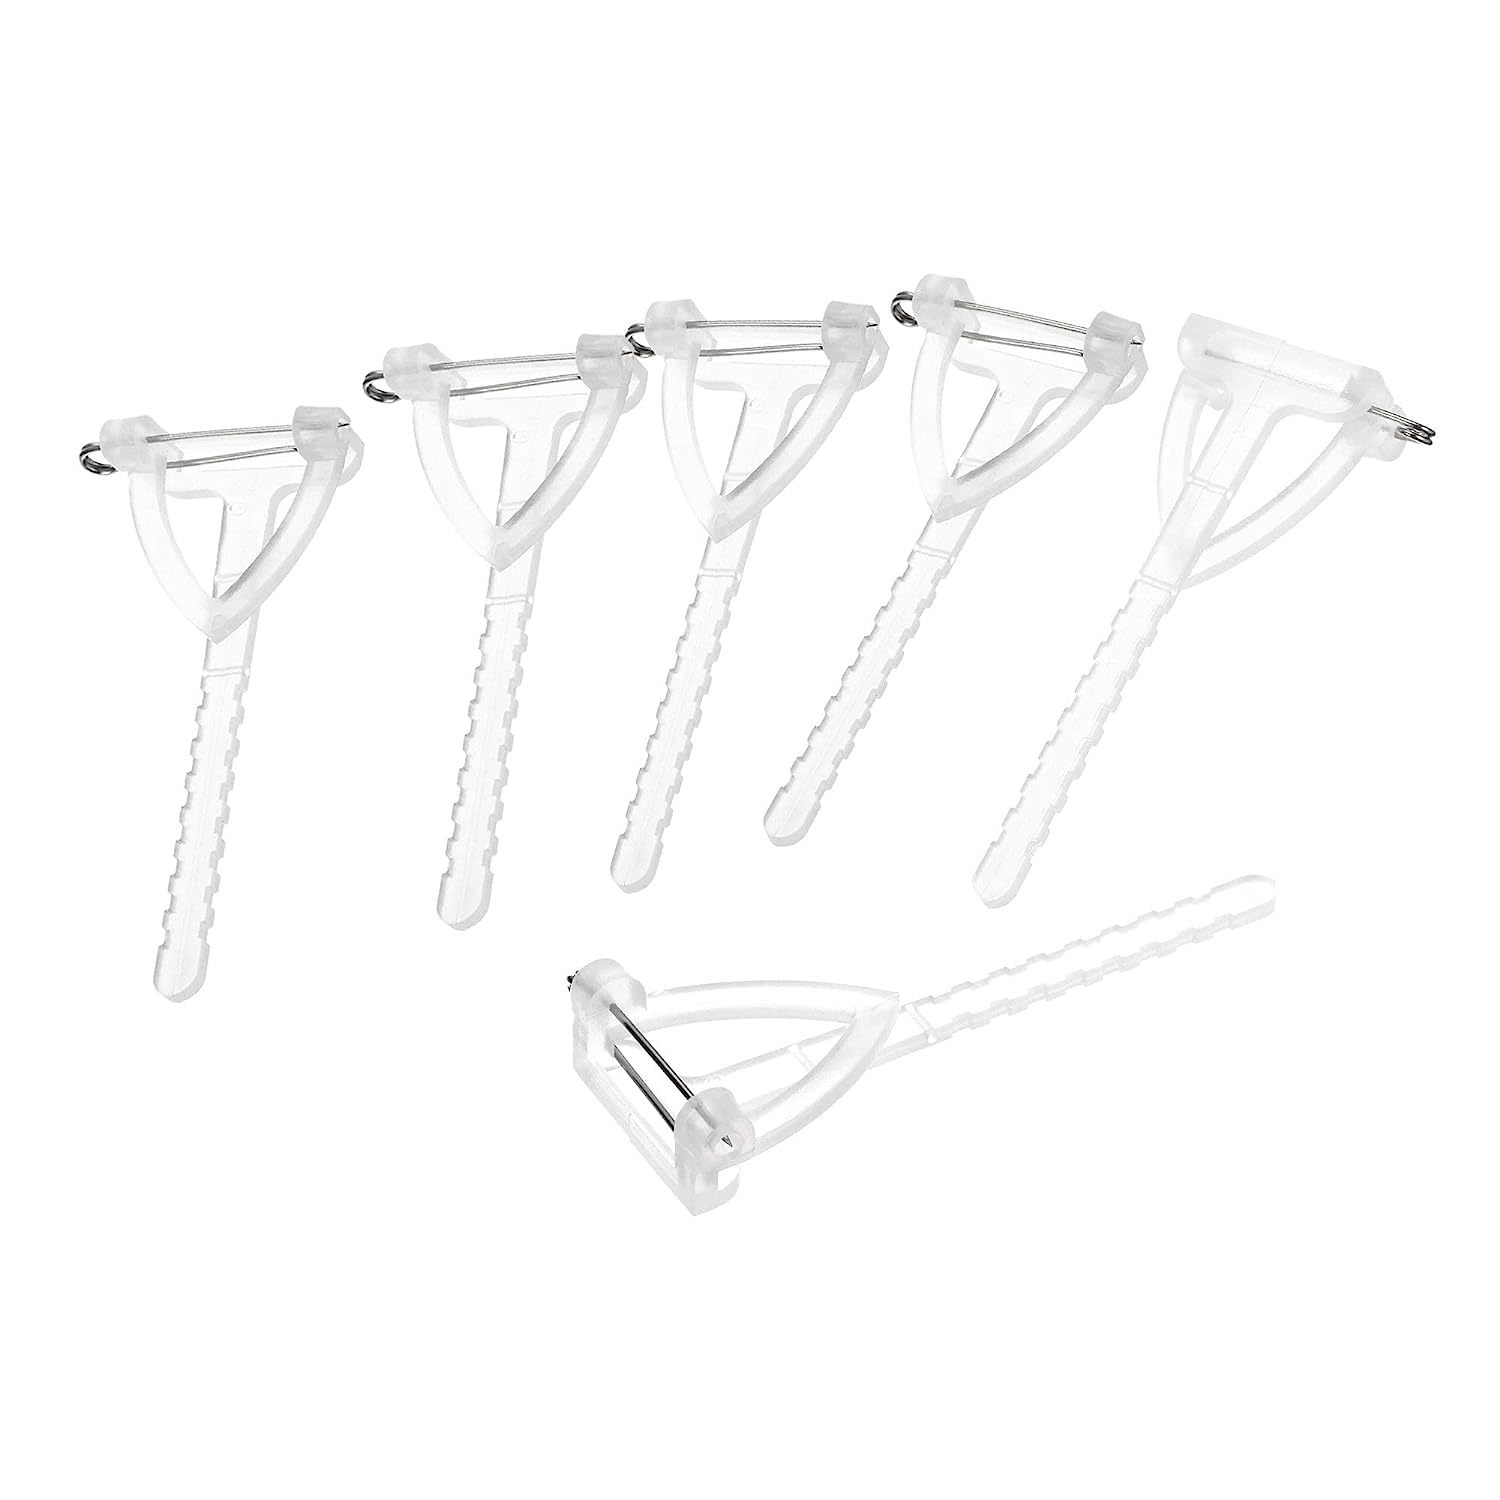  Heavy Duty Large 1-1/2 Safety Pins - High-Grade Steel